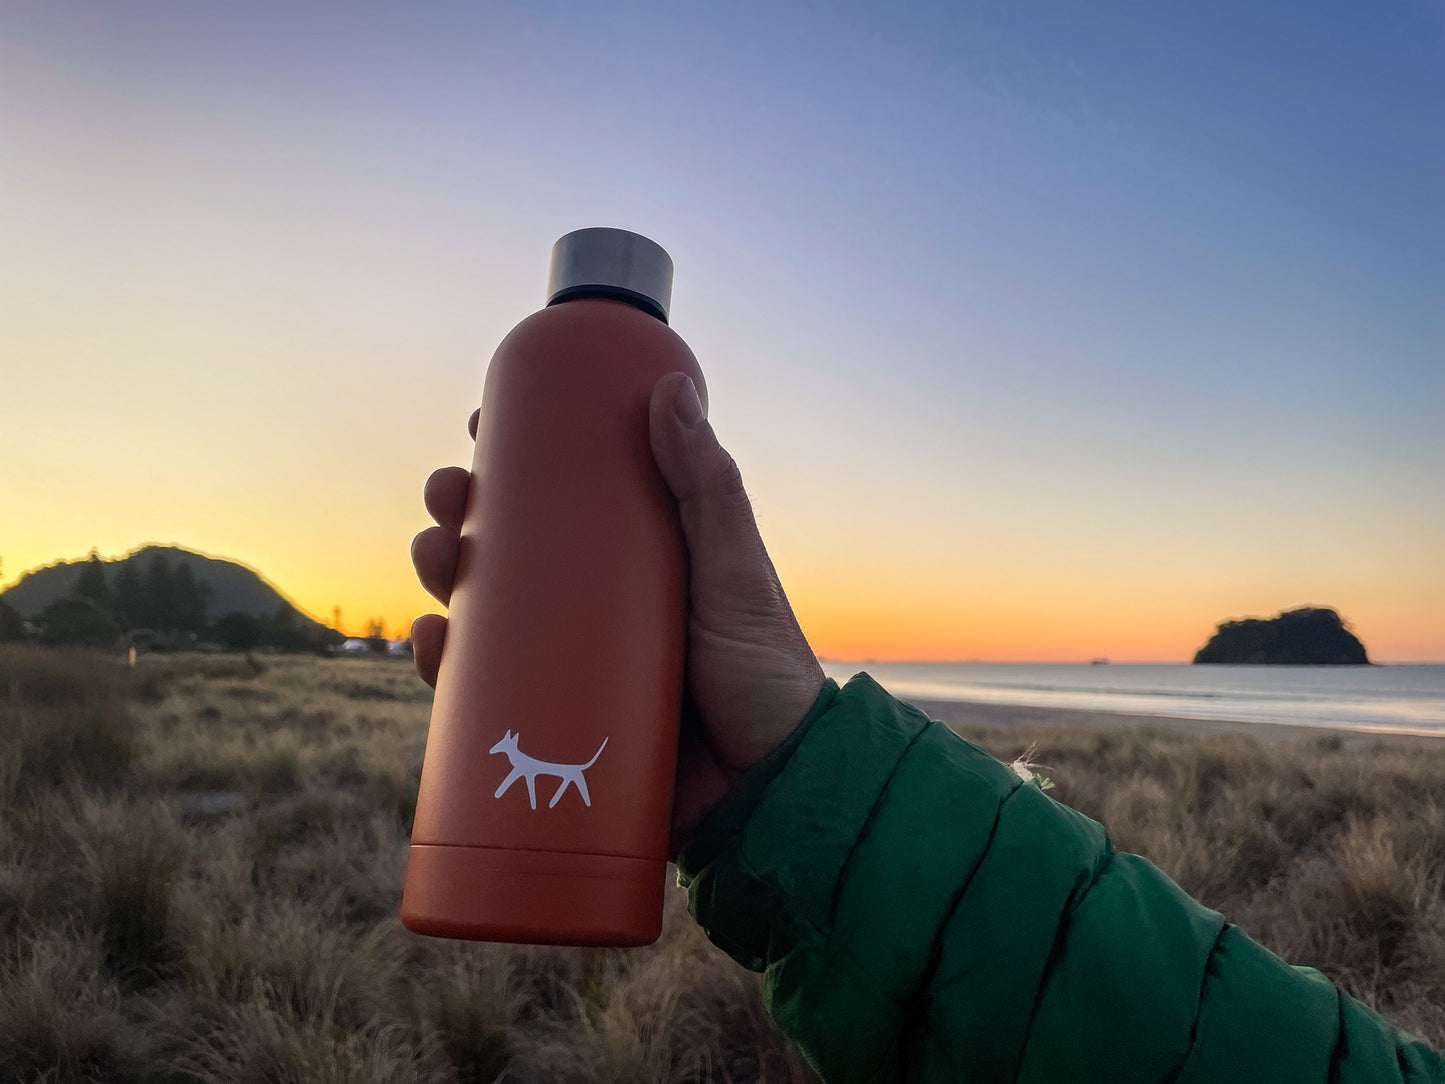 Male hand holding a stainless steel water bottle in rust colour with cream Droggo logo on the front. Beachy sunset background.